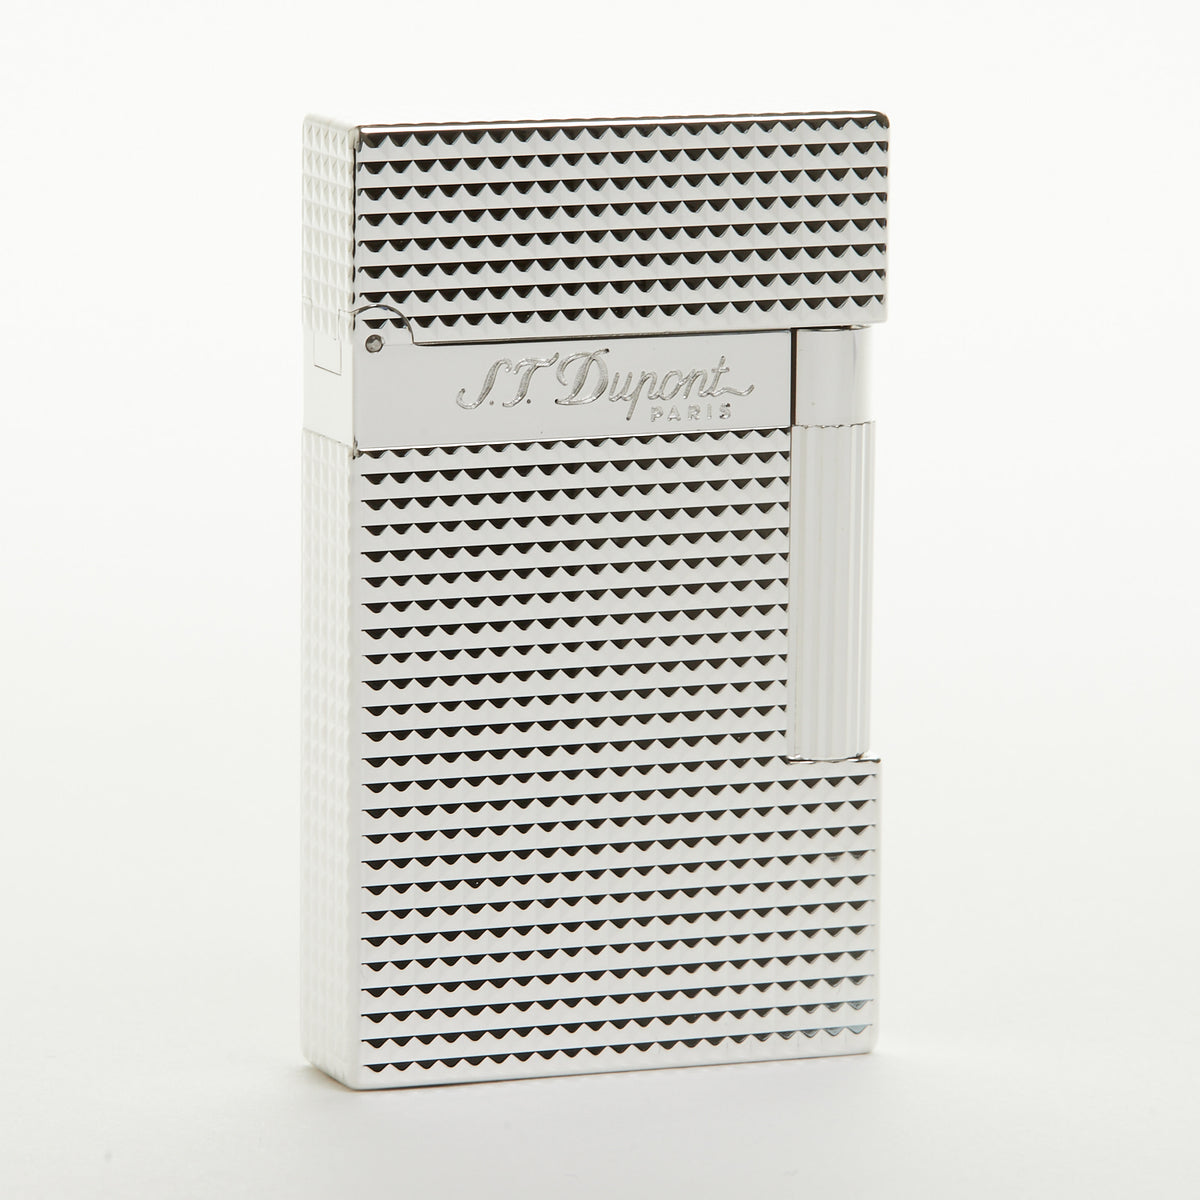 S.T. Dupont Line 2 Diamond Head Silver-Plated Lighter